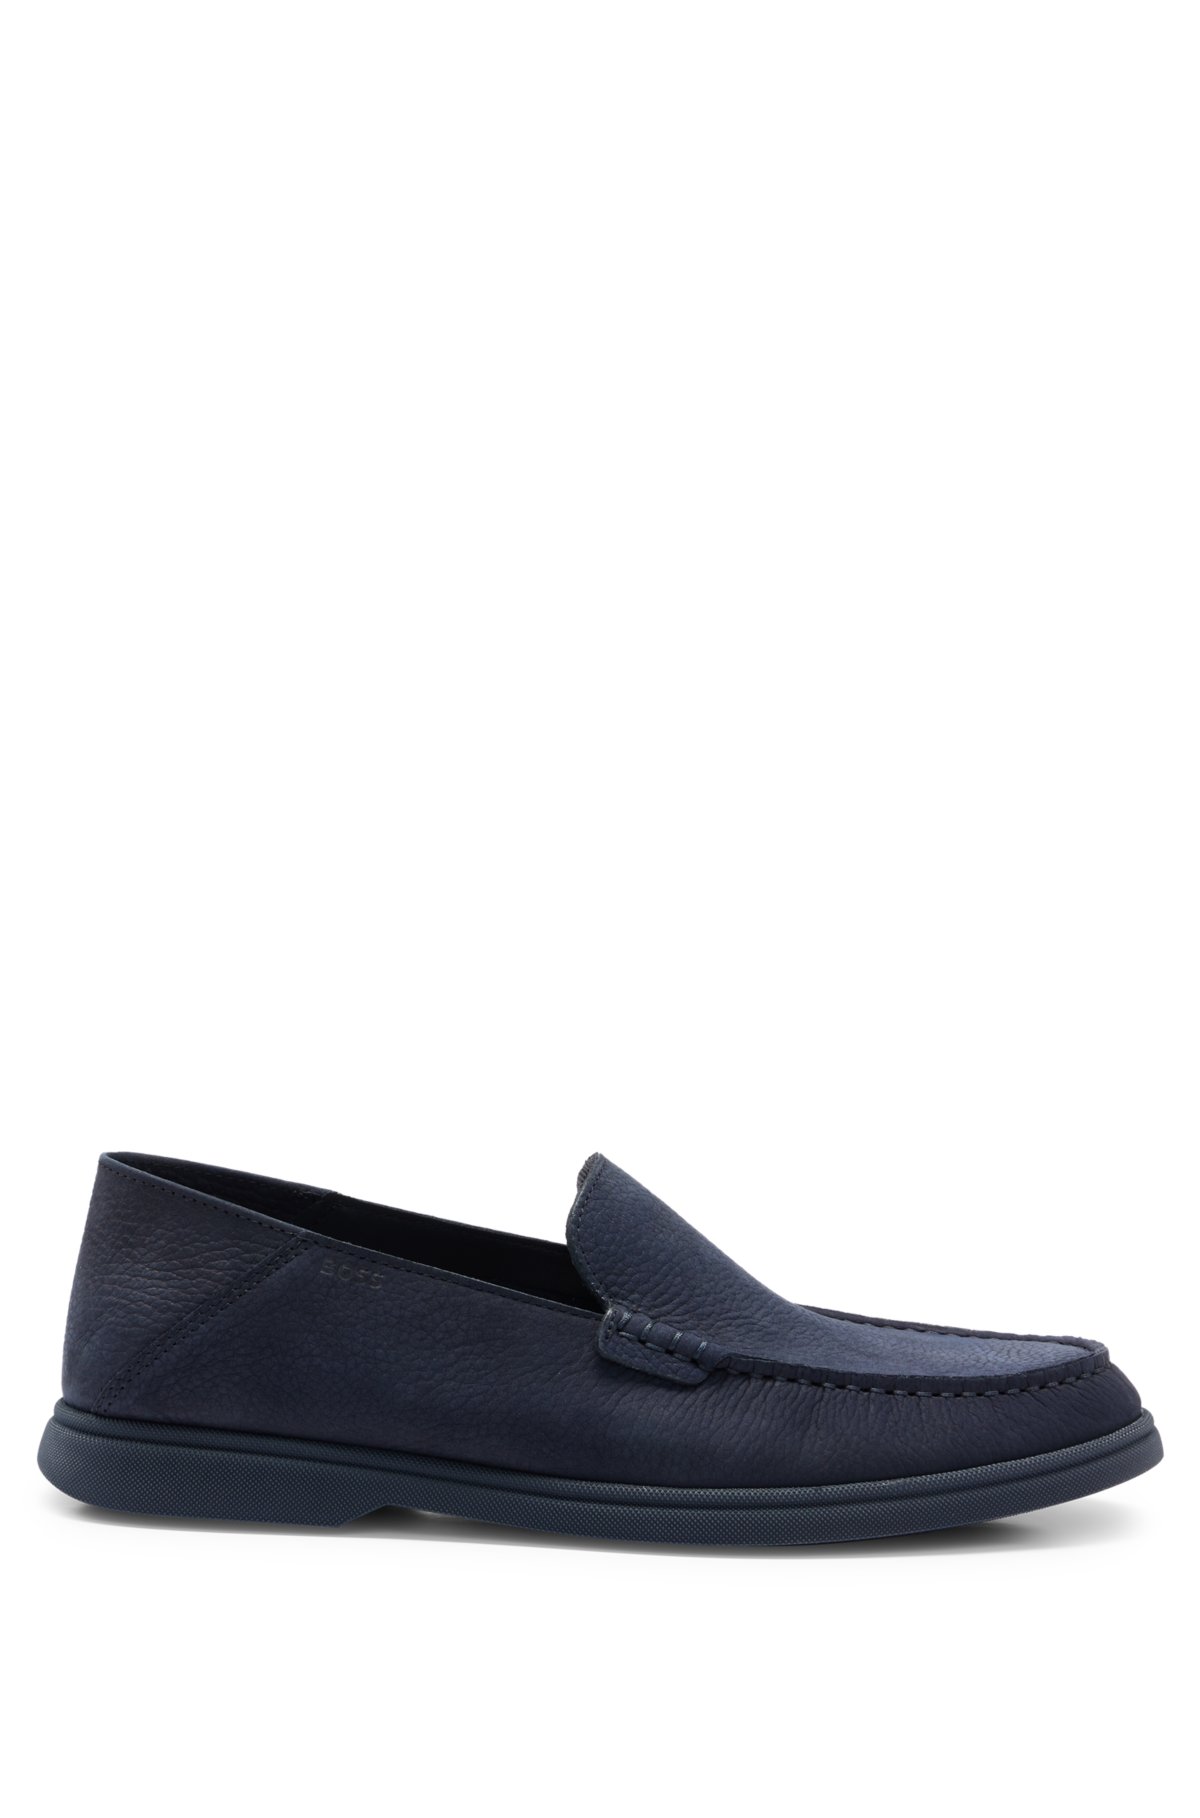 BOSS - Nubuck moccasins with embossed logo and apron toe